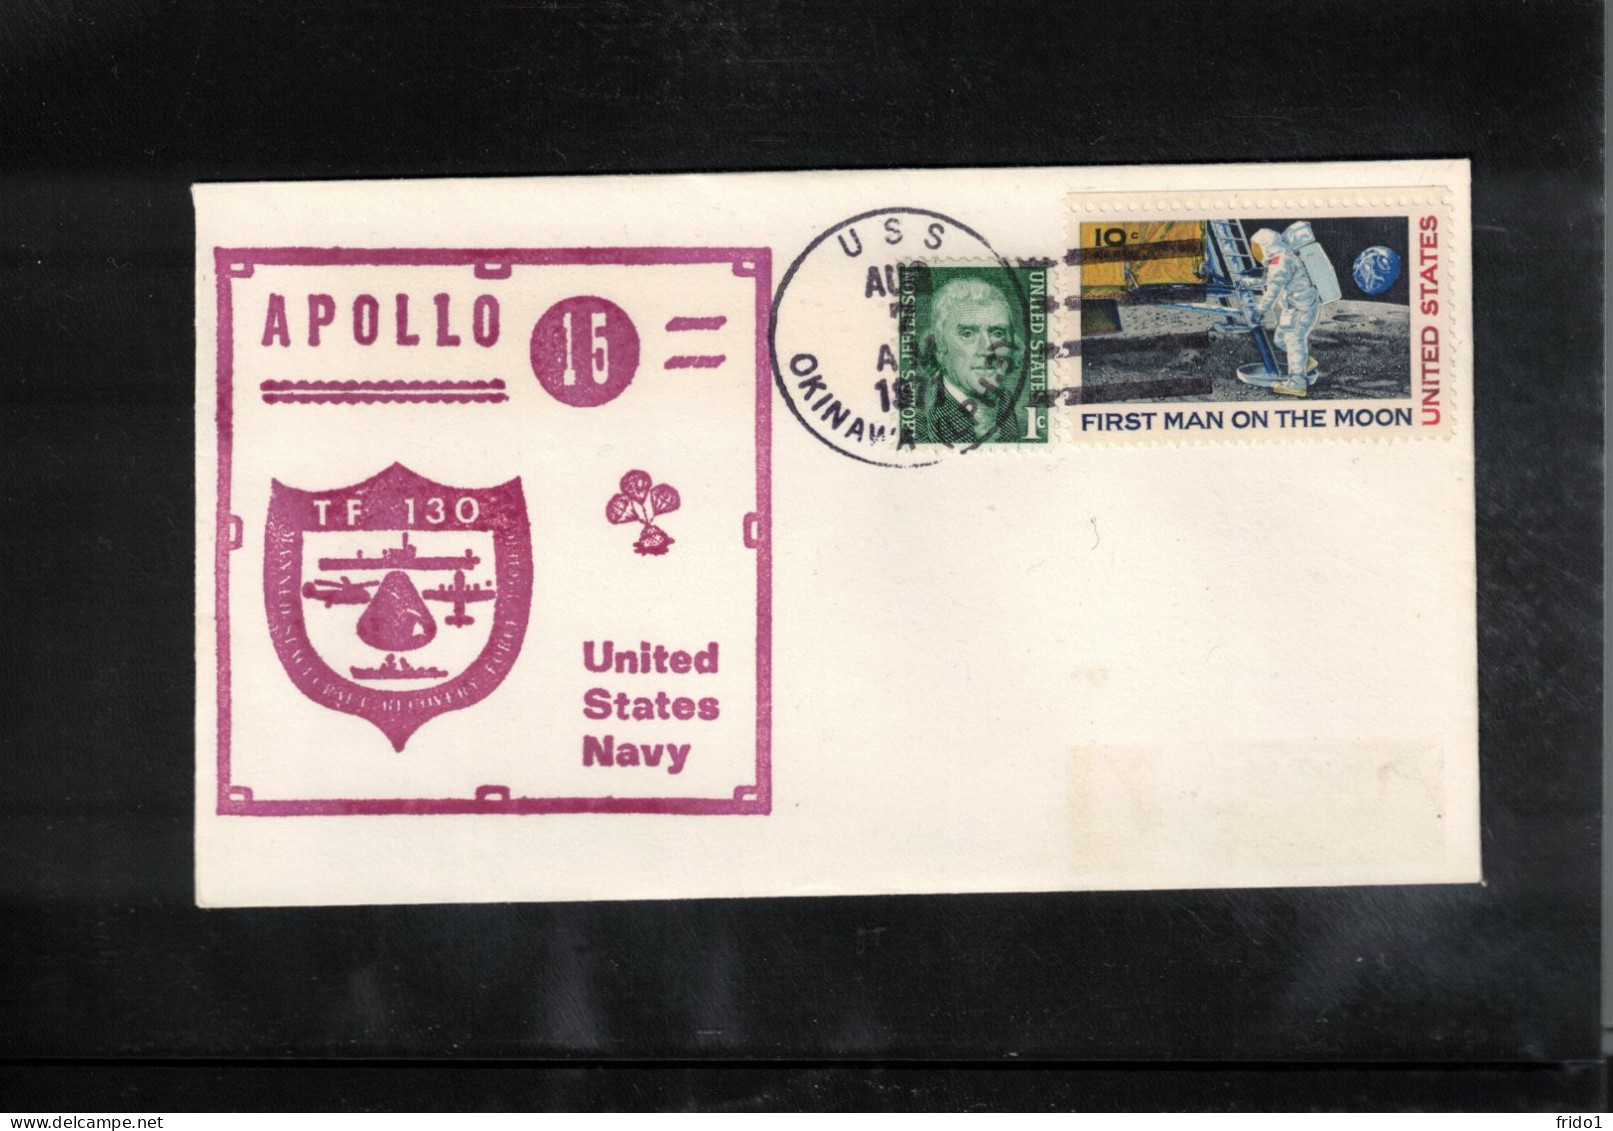 USA 1971 Space / Weltraum - Apollo 15 US Navy Recovery Force TF 130 - USS OKINAWA Interesting Cover - USA